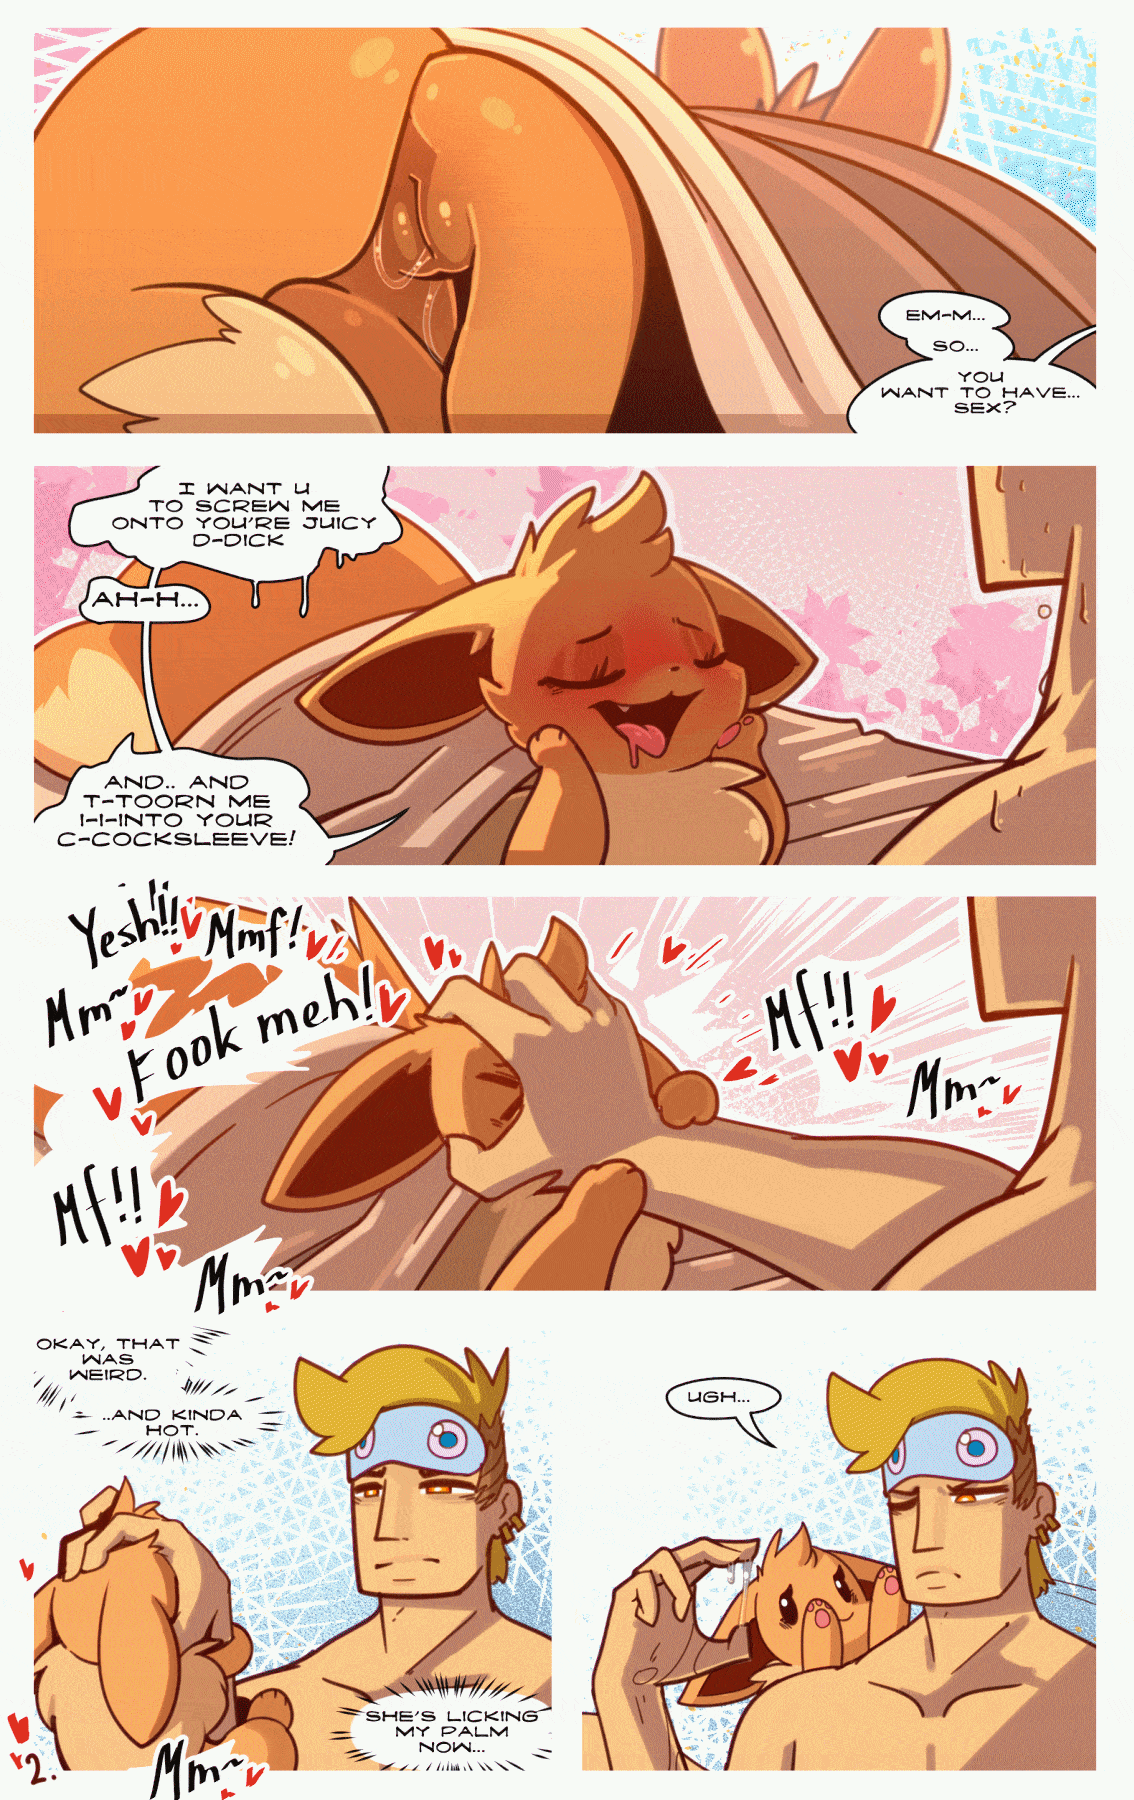 Drink 'till she's cute - Page 2